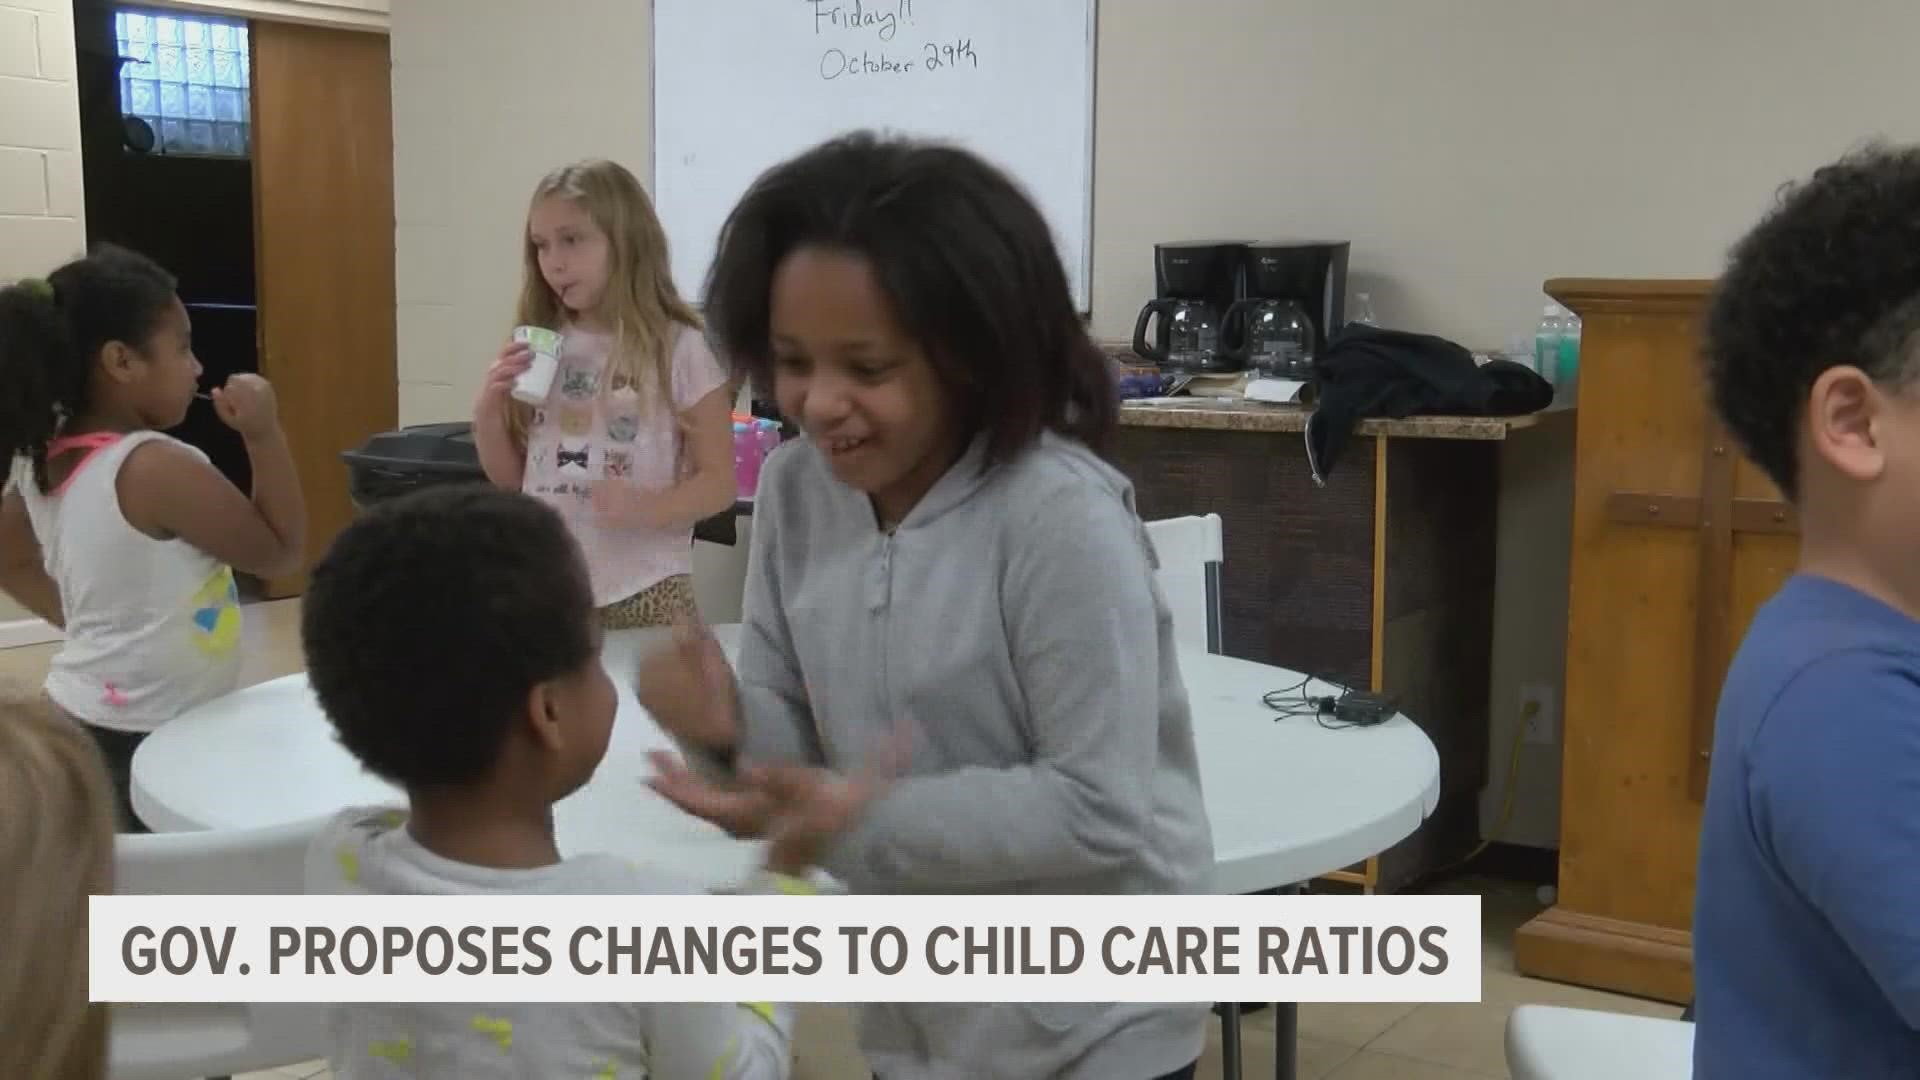 The increased ratios are part of the governor's plan to improve access to child care in Iowa